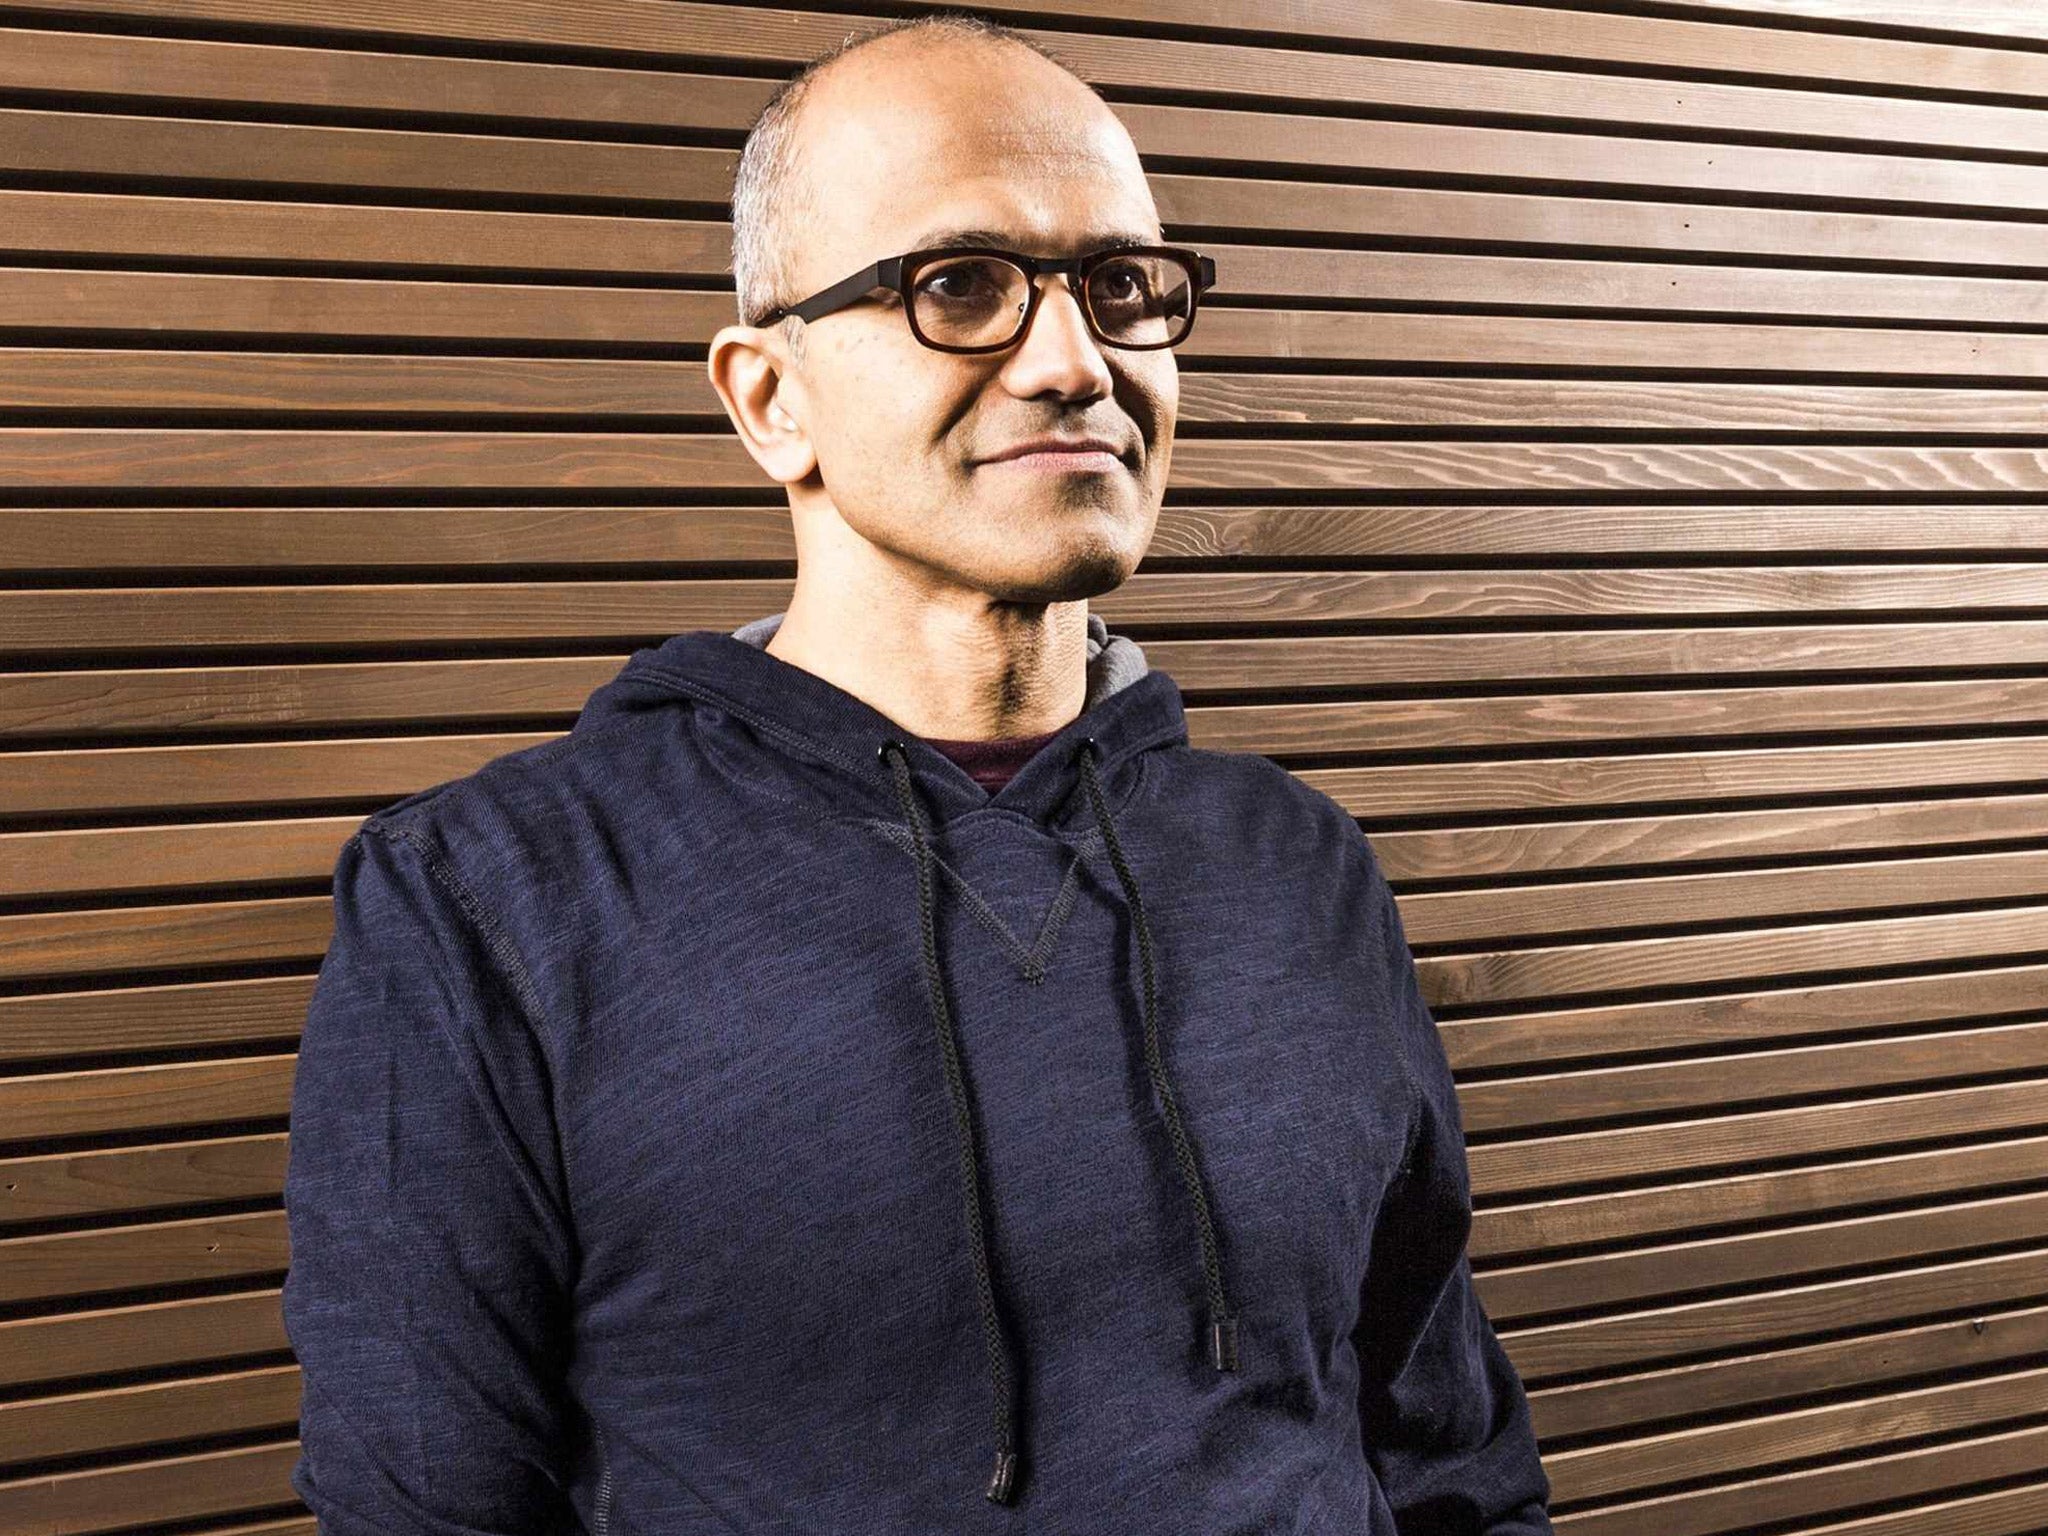 Satya Nadella said he learned much of his managerial style from playing cricket as a schoolboy in India